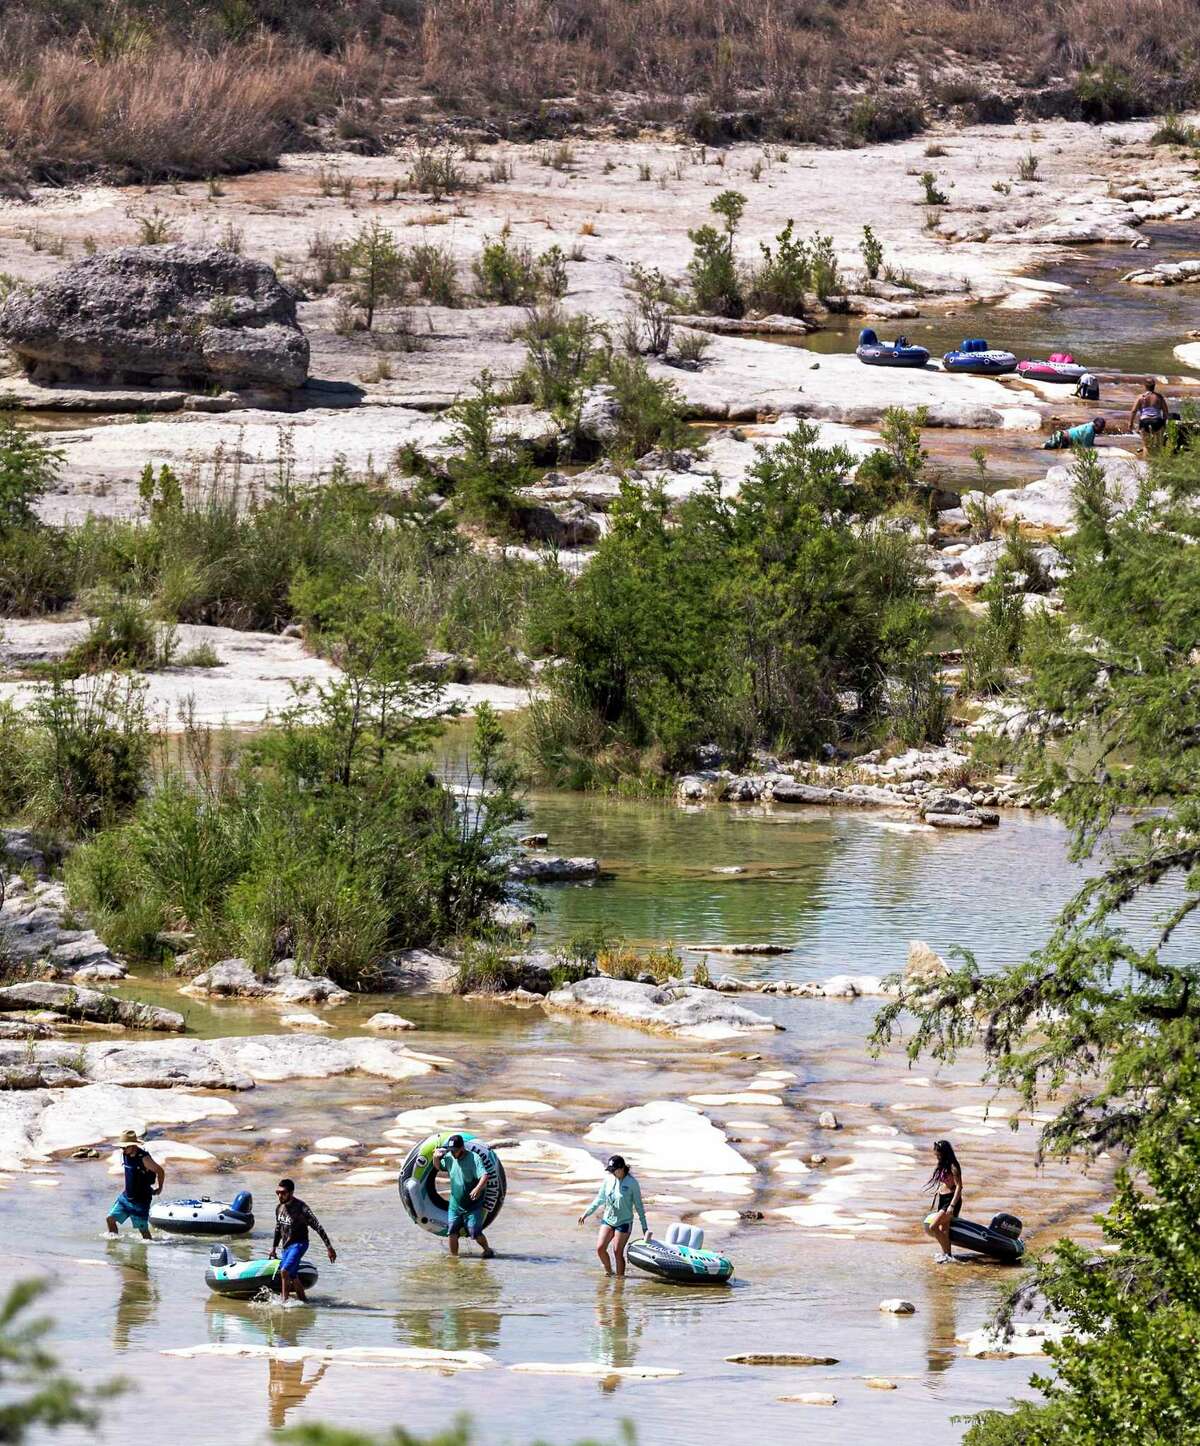 People carry inner tubes on June 23 along a nearly dry Frio River in Garner State Park. The U.S. Geological Survey river gauge downstream from the park in Concan measured zero flow in the river that day, according to the USGS’s water data website.